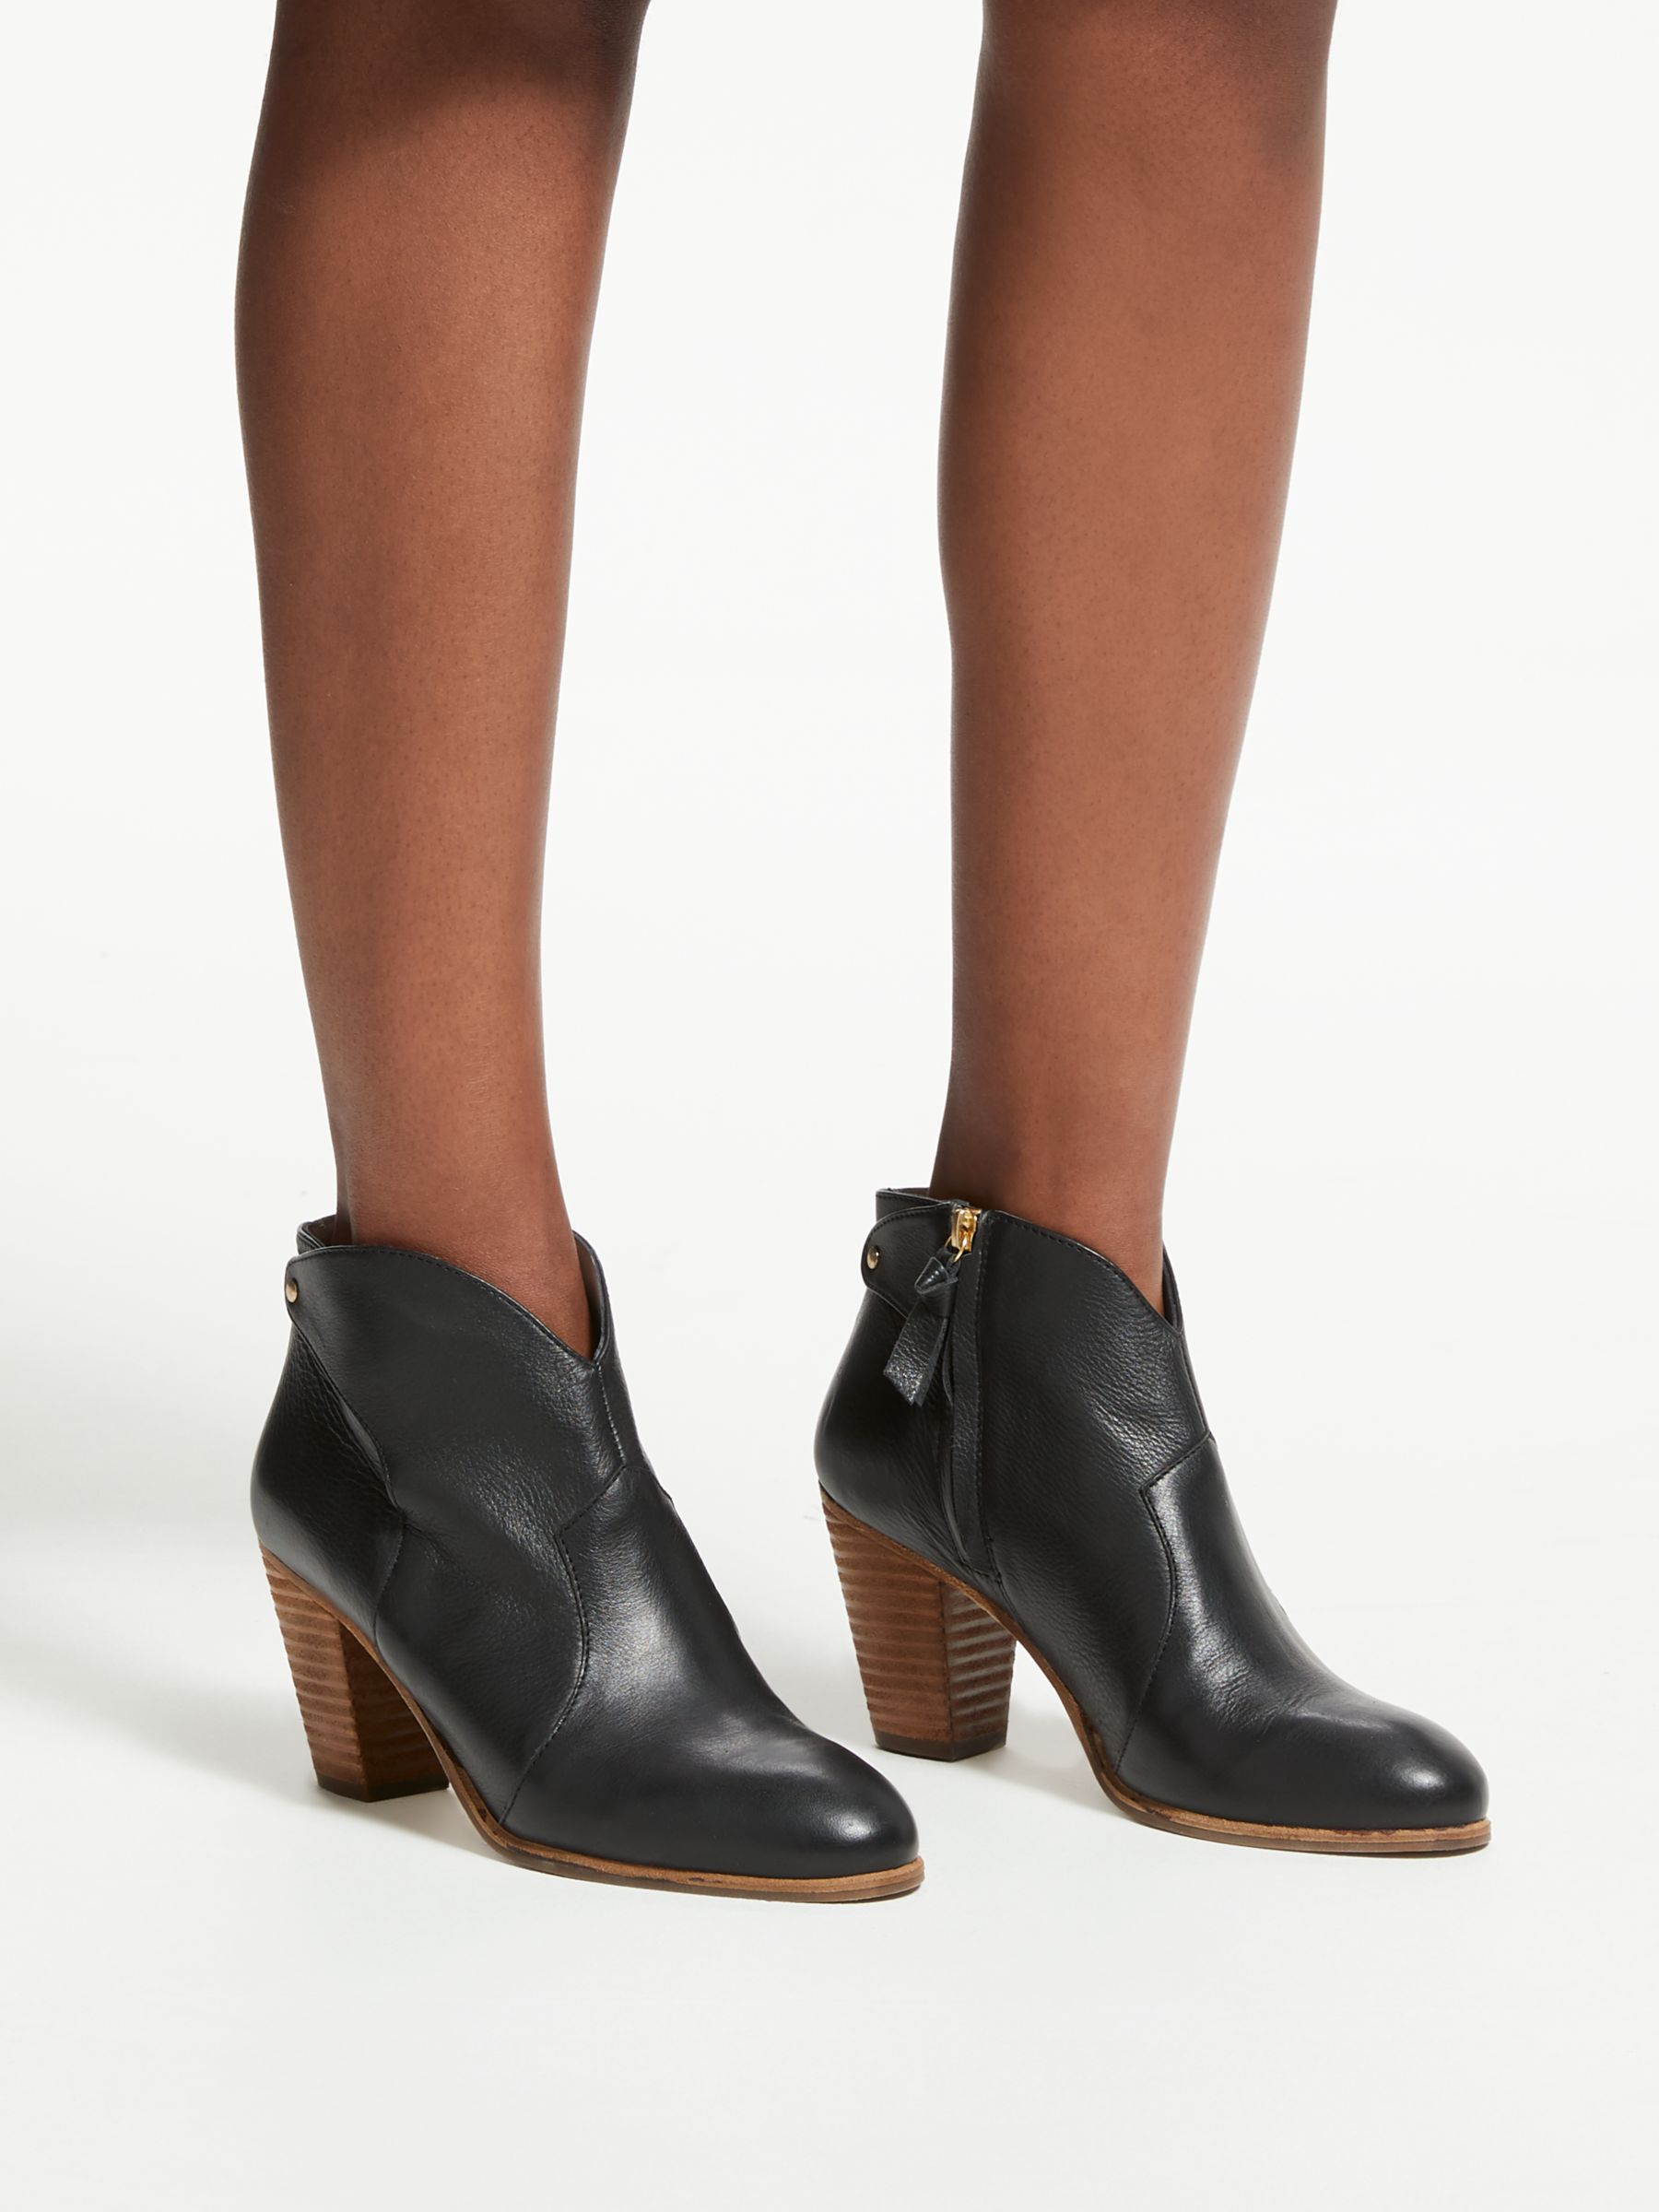 Boden Hoxton Block Heeled Ankle Boots 